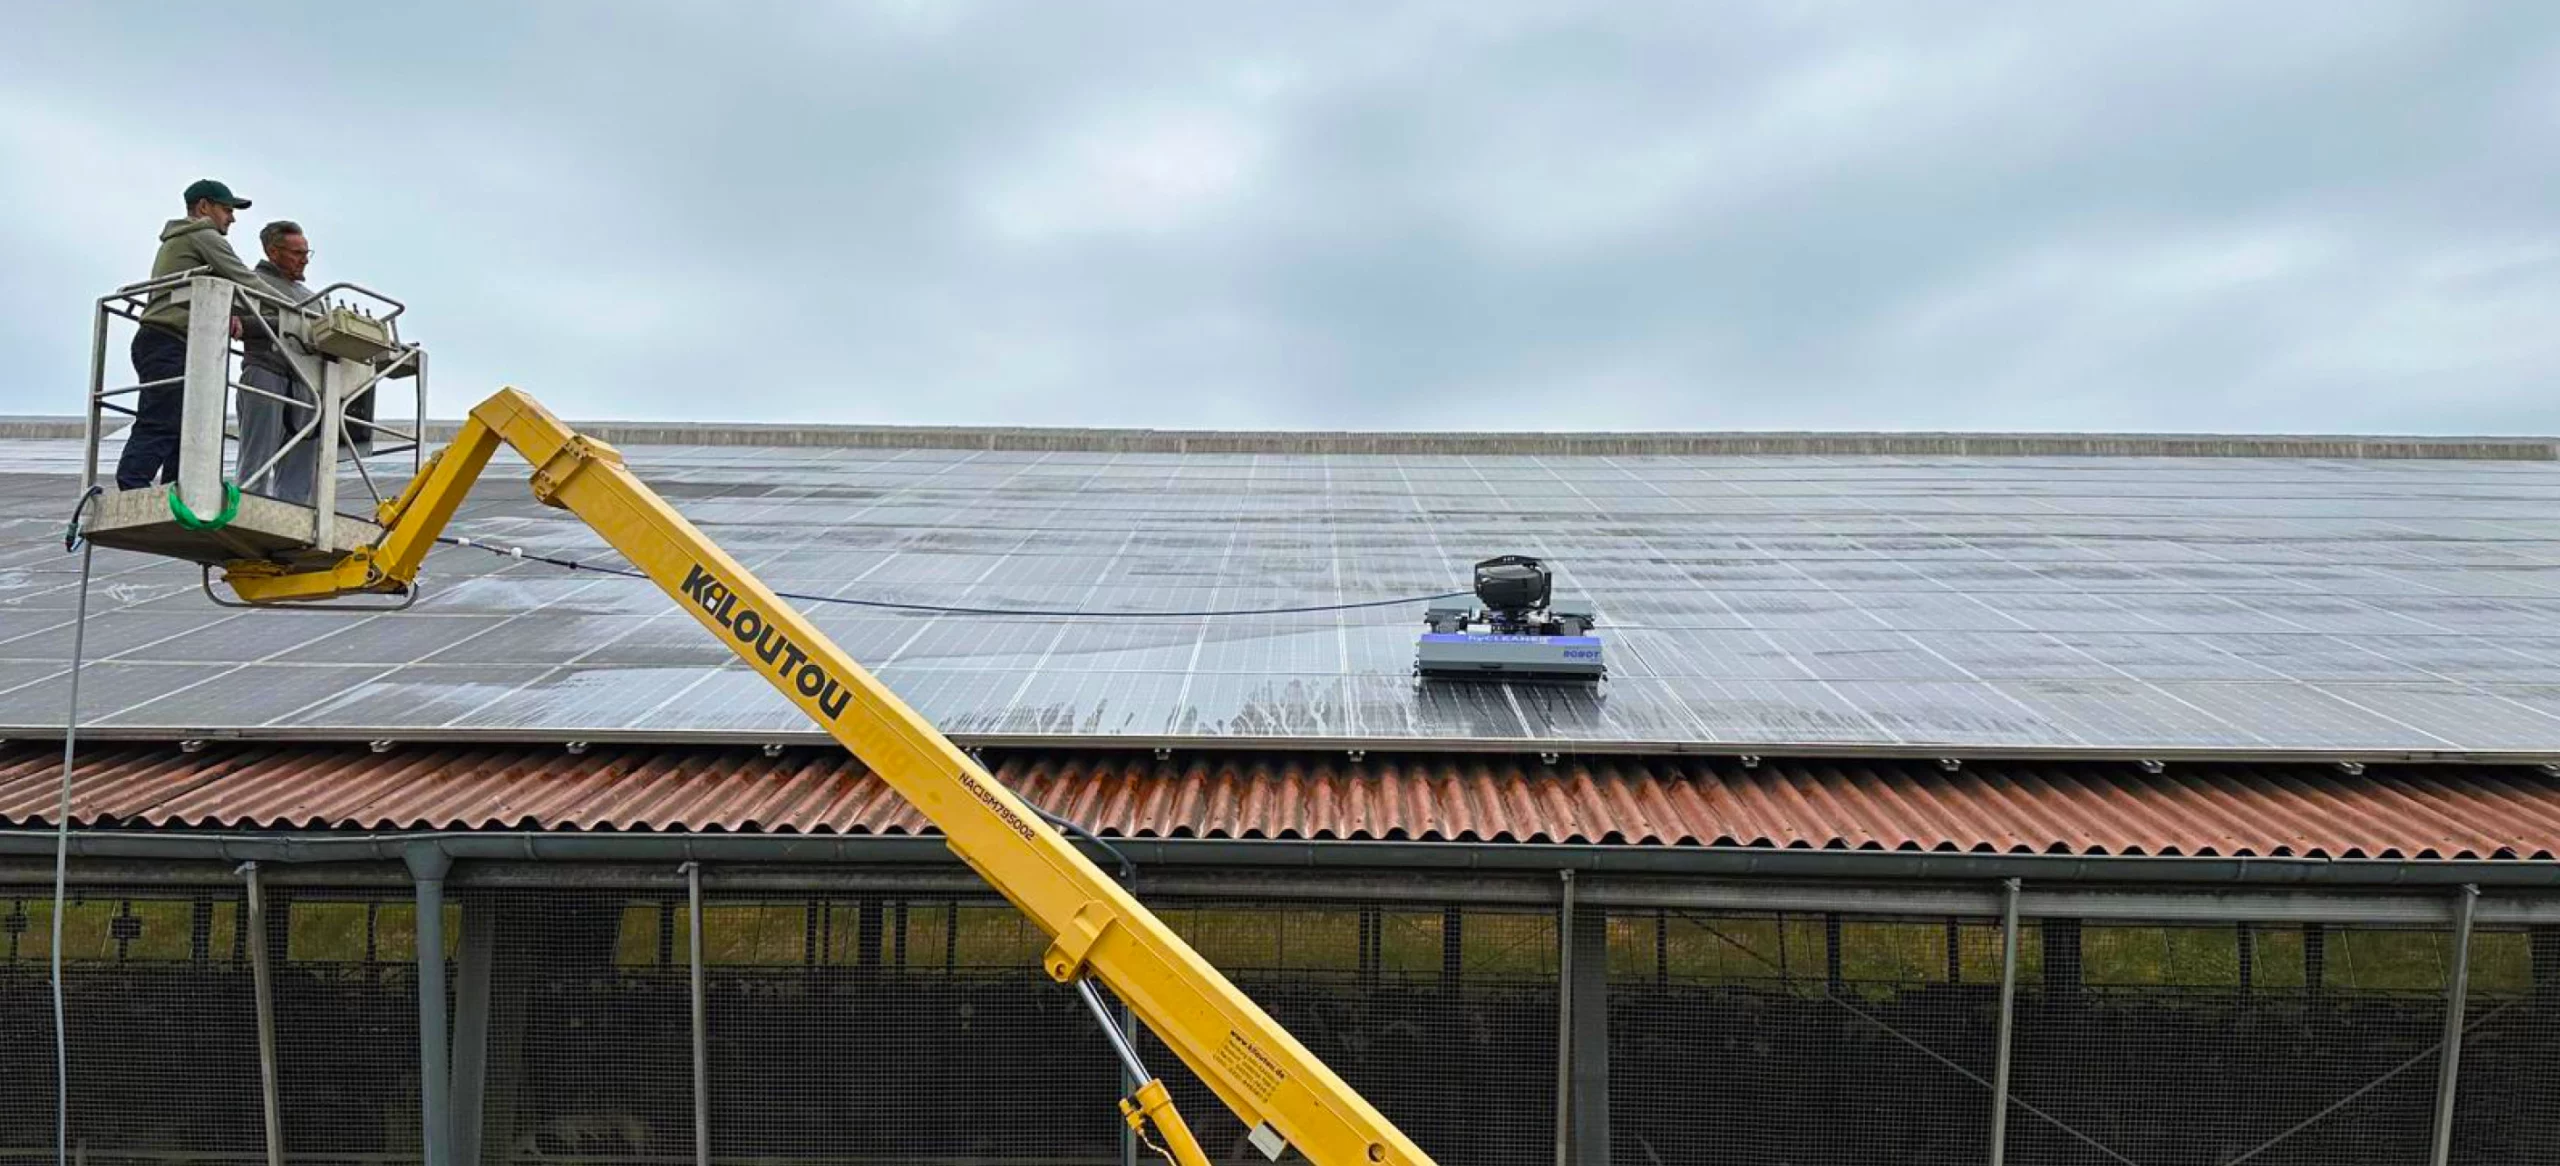 Photovoltaic cleaning with PV cleaning robot and work platform